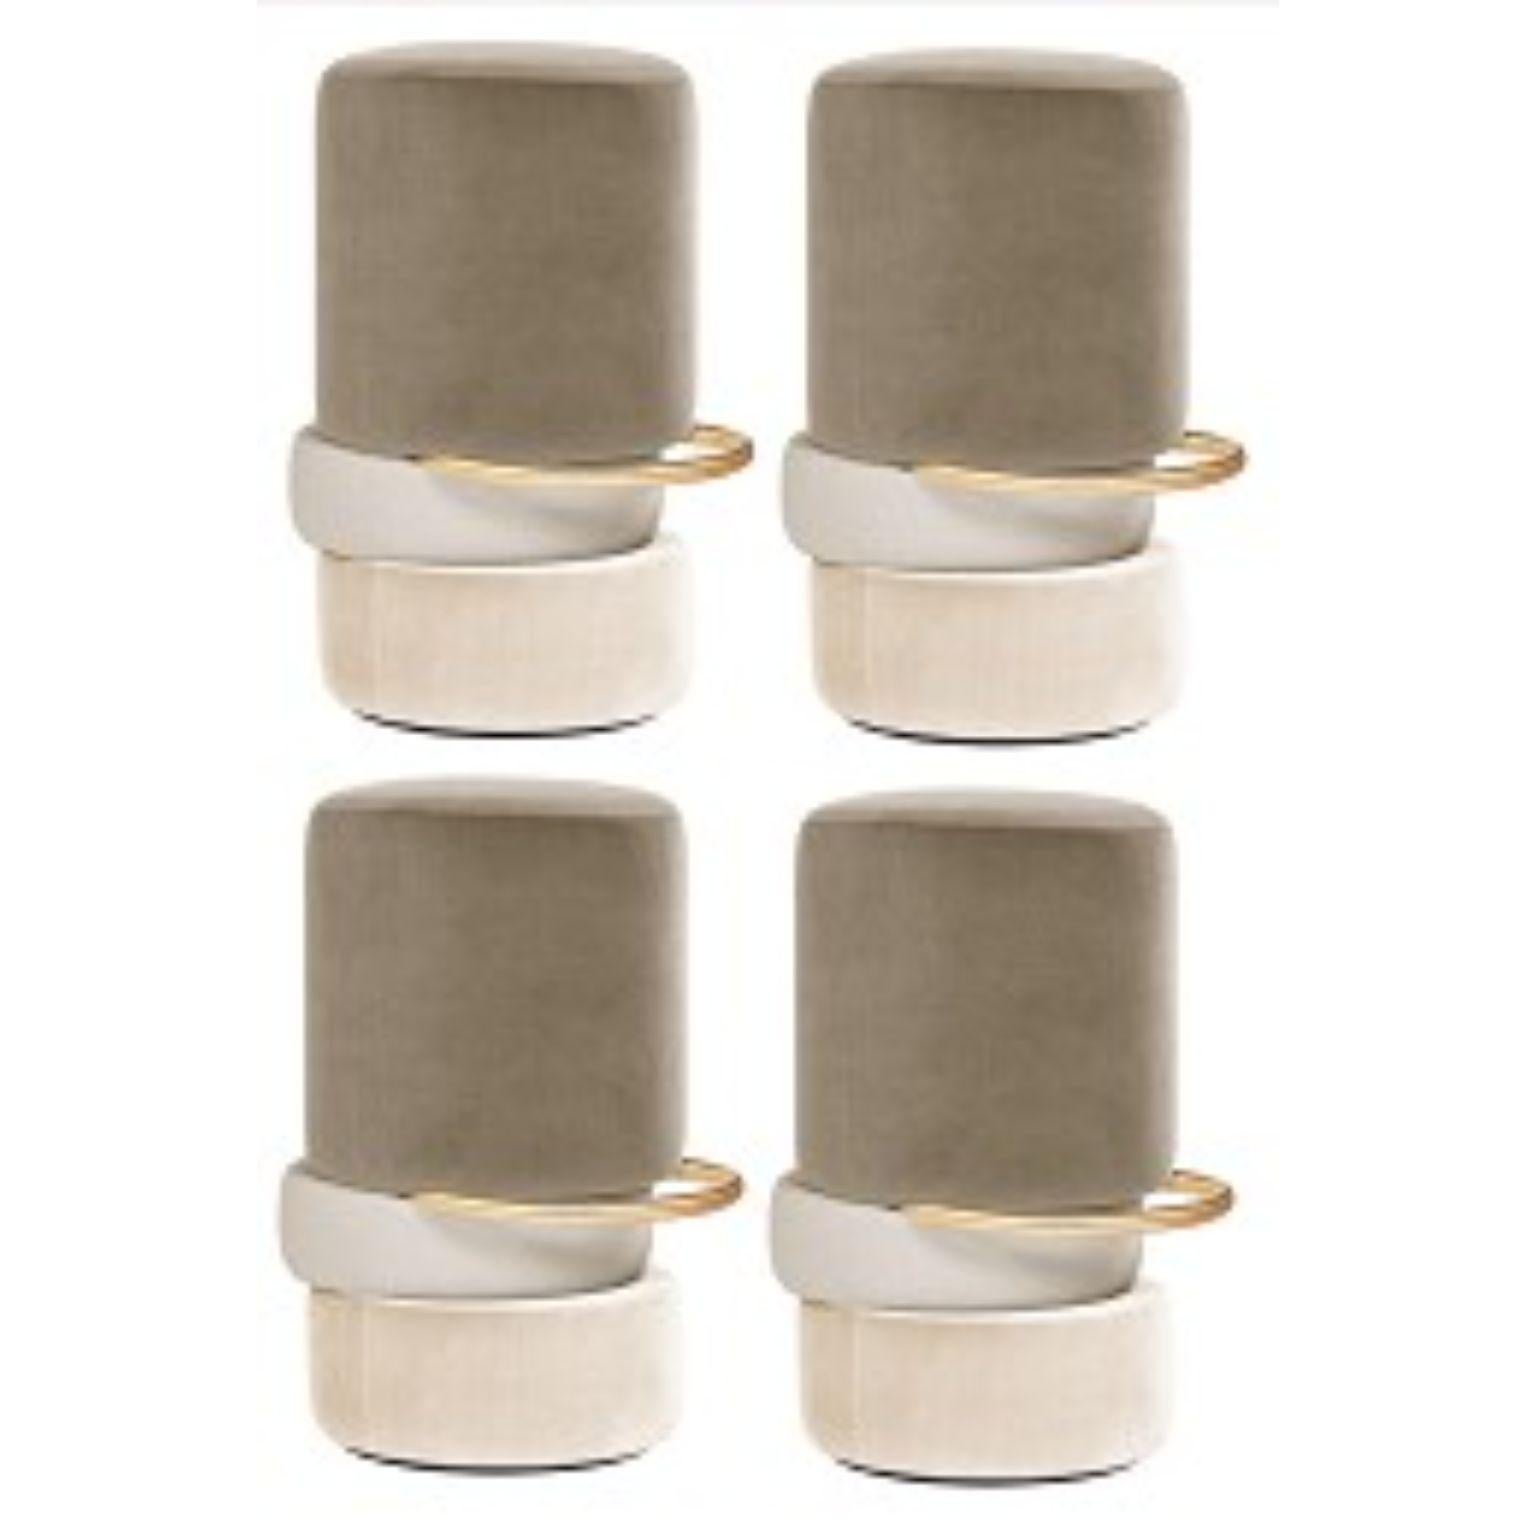 Set of 4 lipstick bar stools by Royal Stranger
Dimensions: 83 x 62 x 46 cm
Materials: A matte body and a matte pattern over a glossy surface, elevated by a brass presence.

With a playful and geometrical form, the lipstick bar stool will make